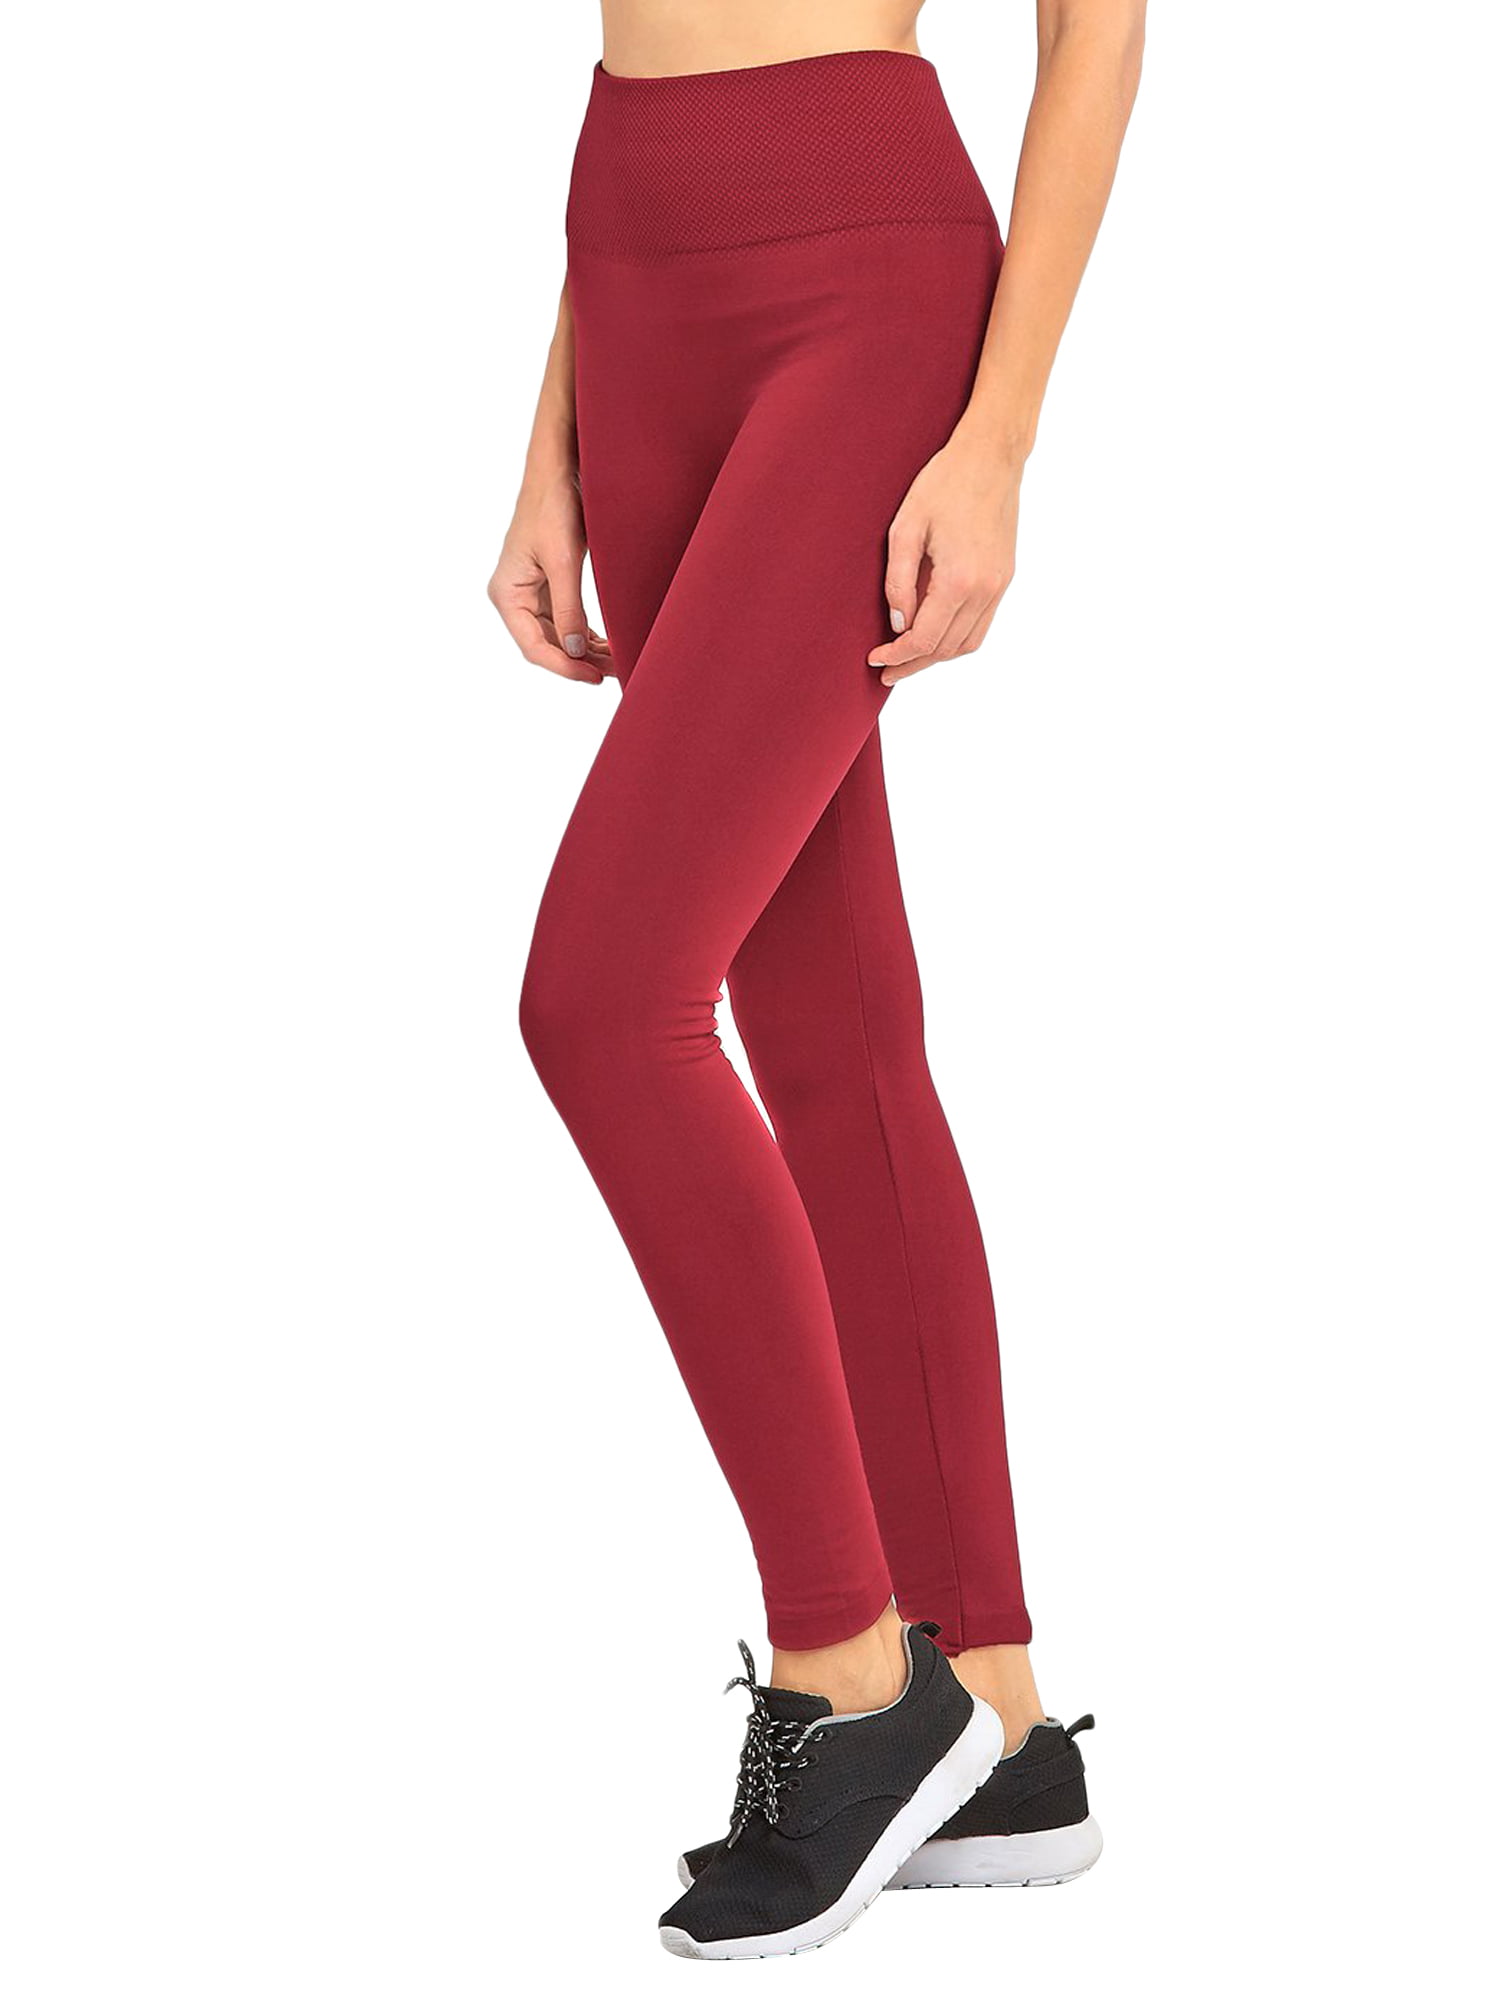 WOMEN'S FRENCH TERRY LUXE LEGGING BY MEMBER'S MARK